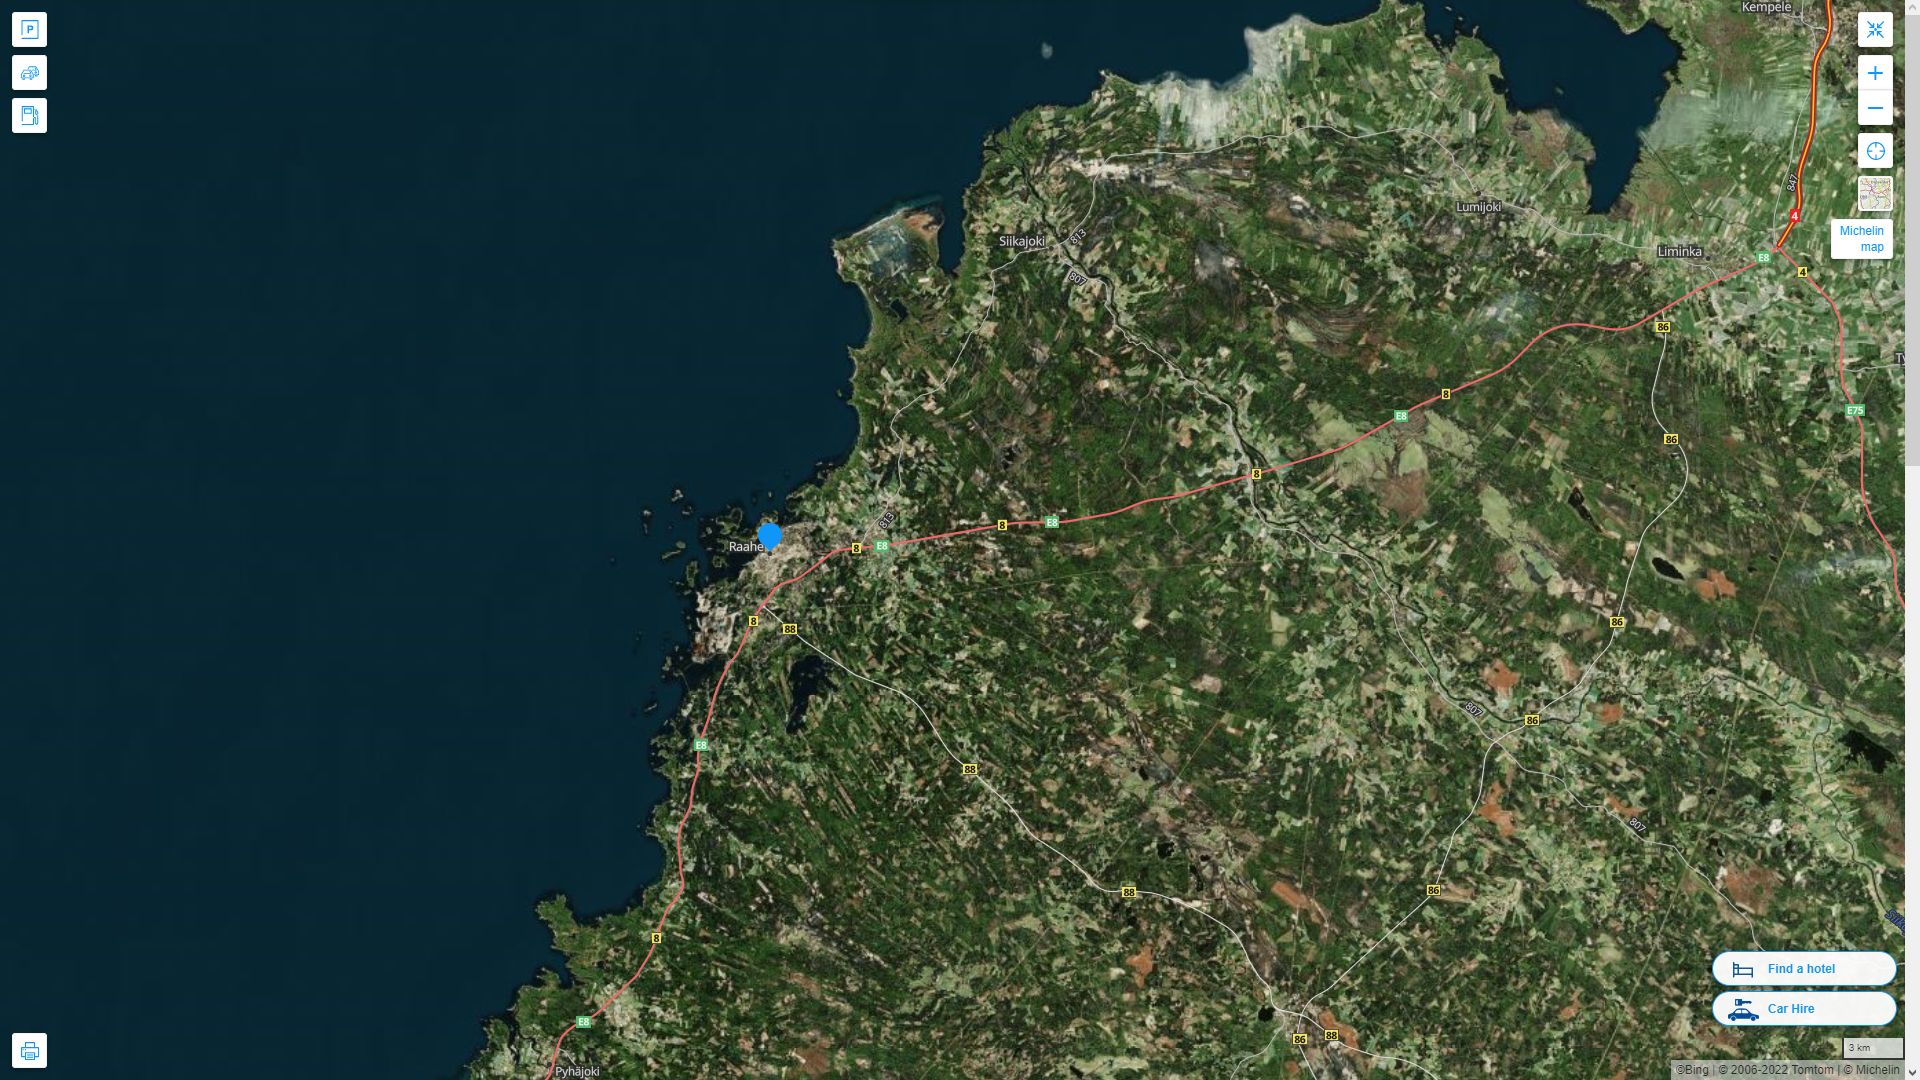 Raahe Highway and Road Map with Satellite View